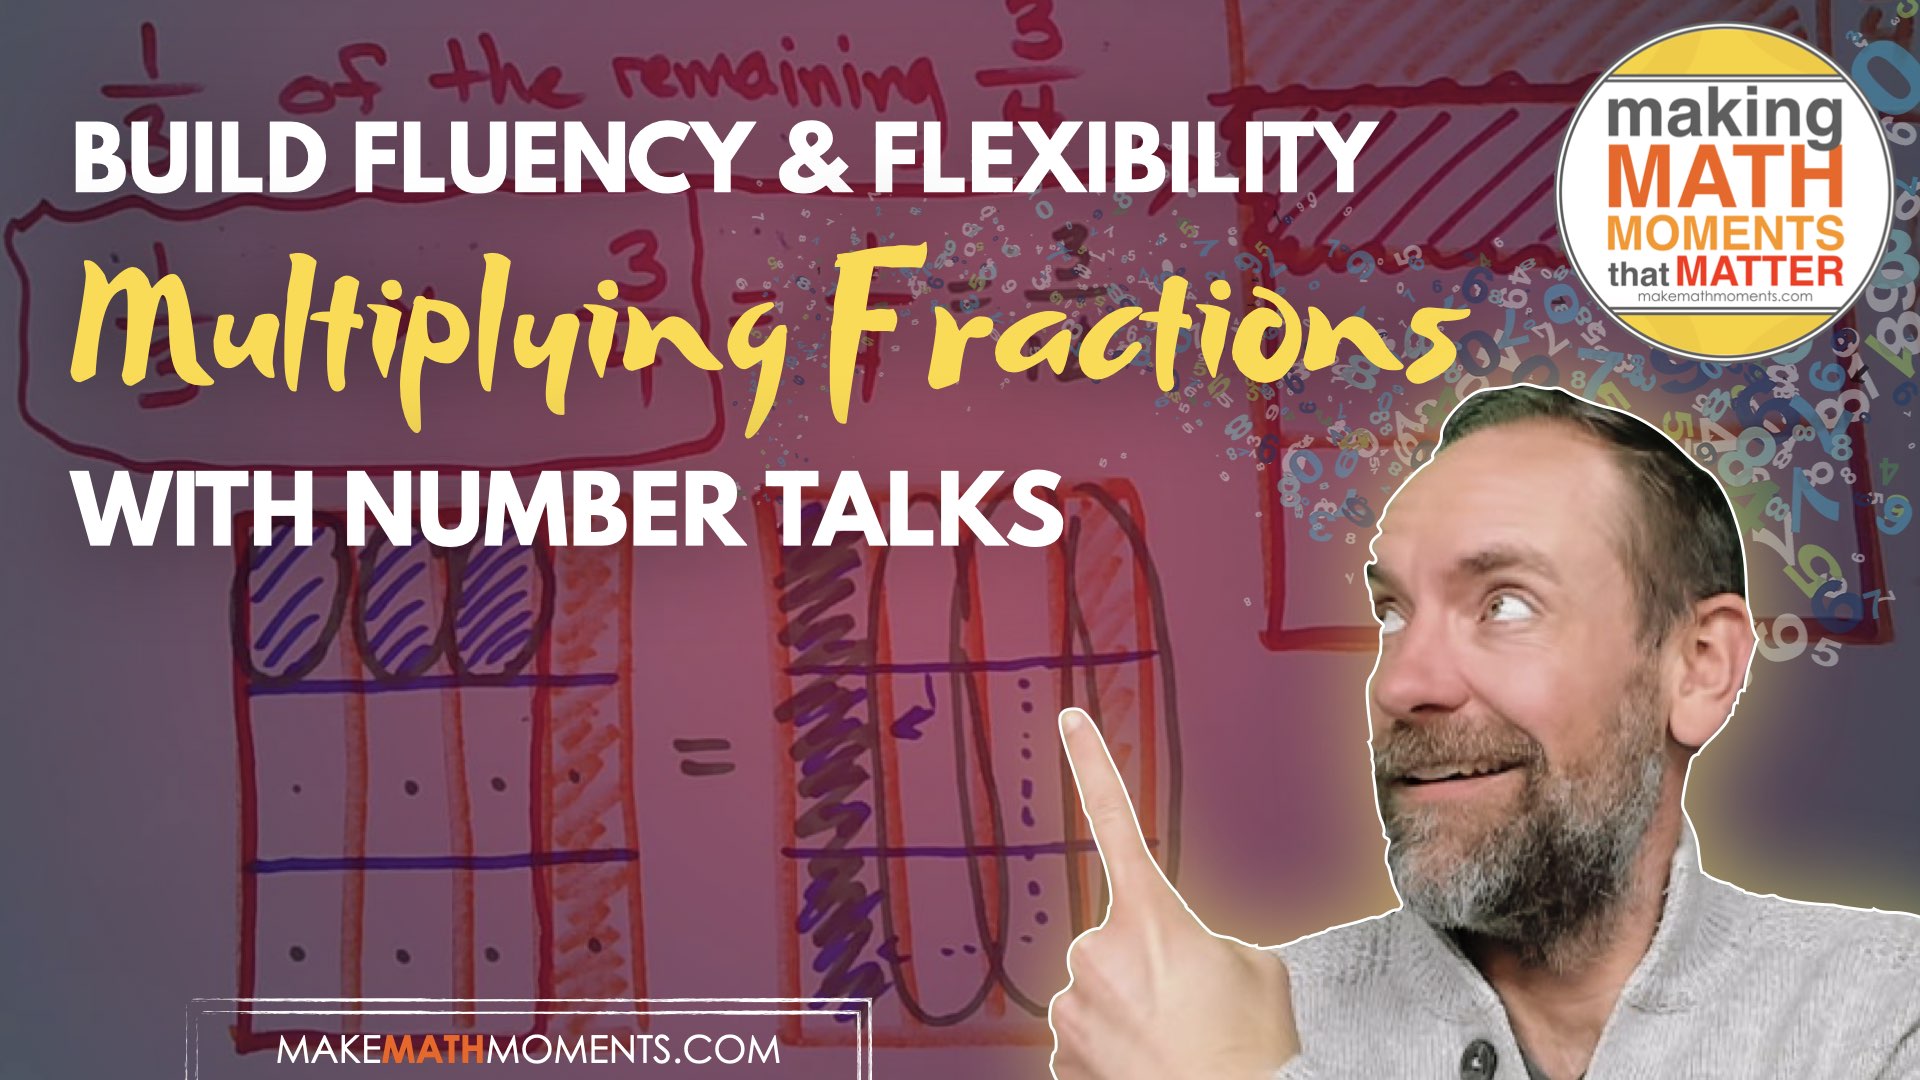 How To Build Fluency and Flexibility Multiplying Fractions With Number Talks